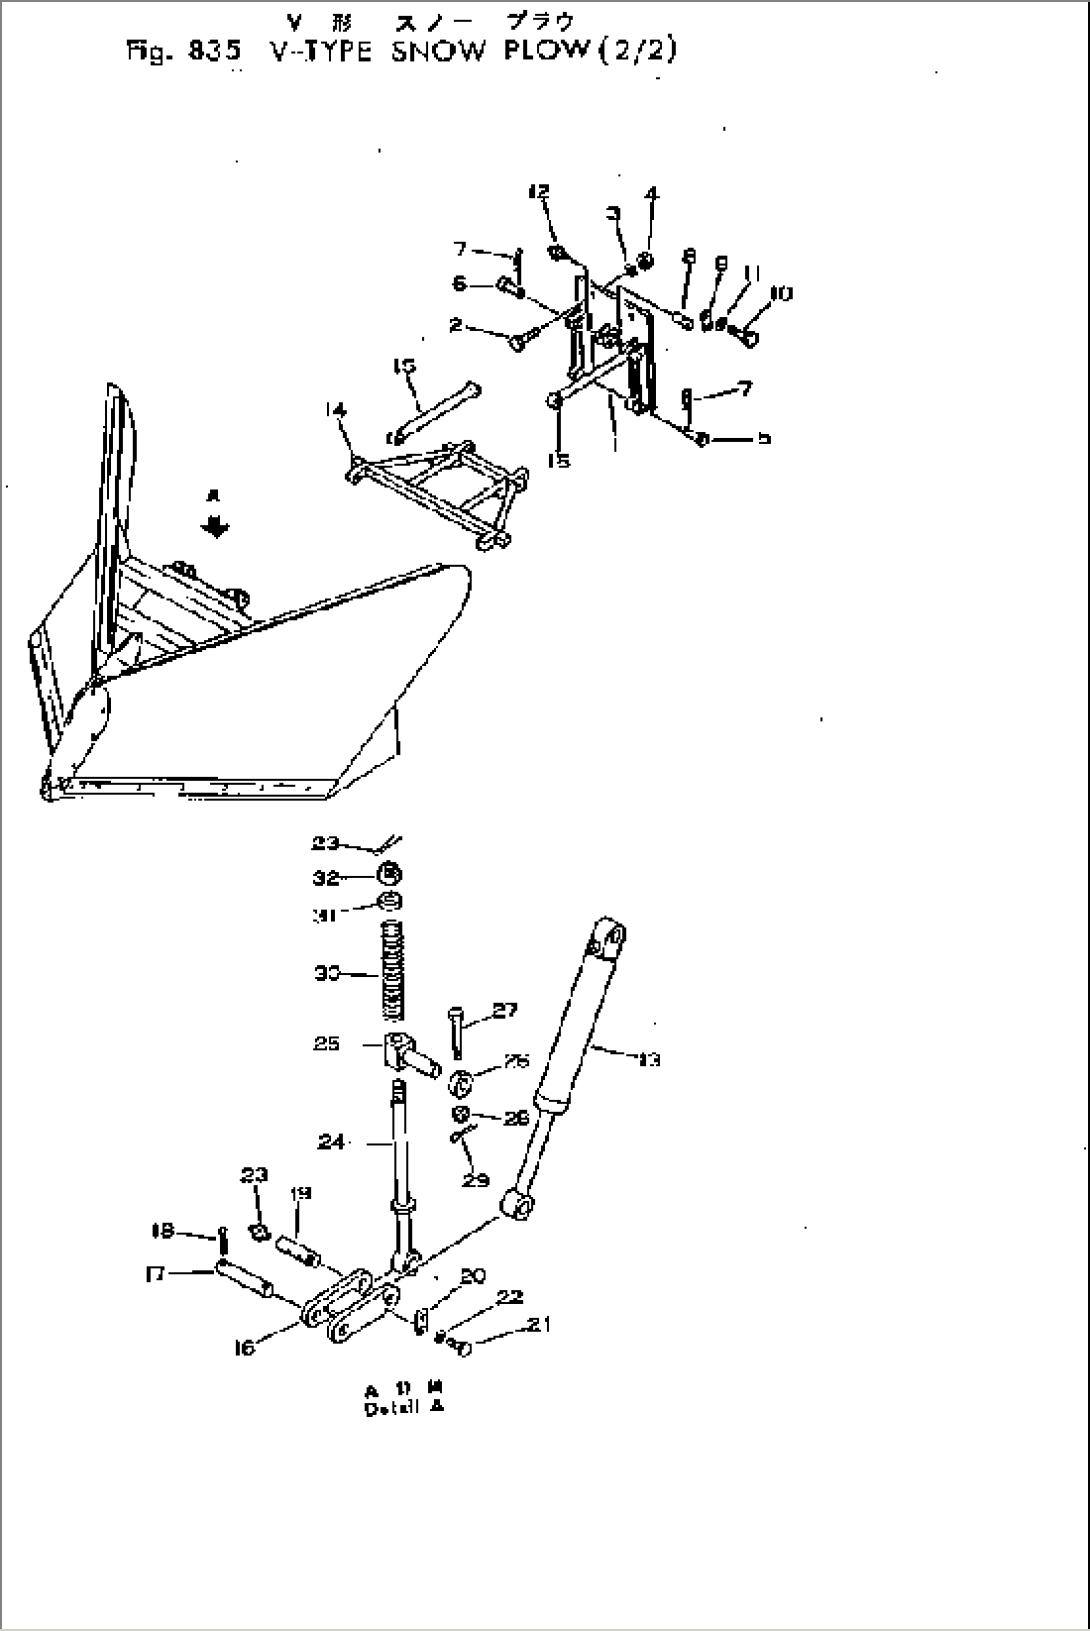 V-TYPE SNOW PLOW (2/2) (LINK AND CYLINDER)